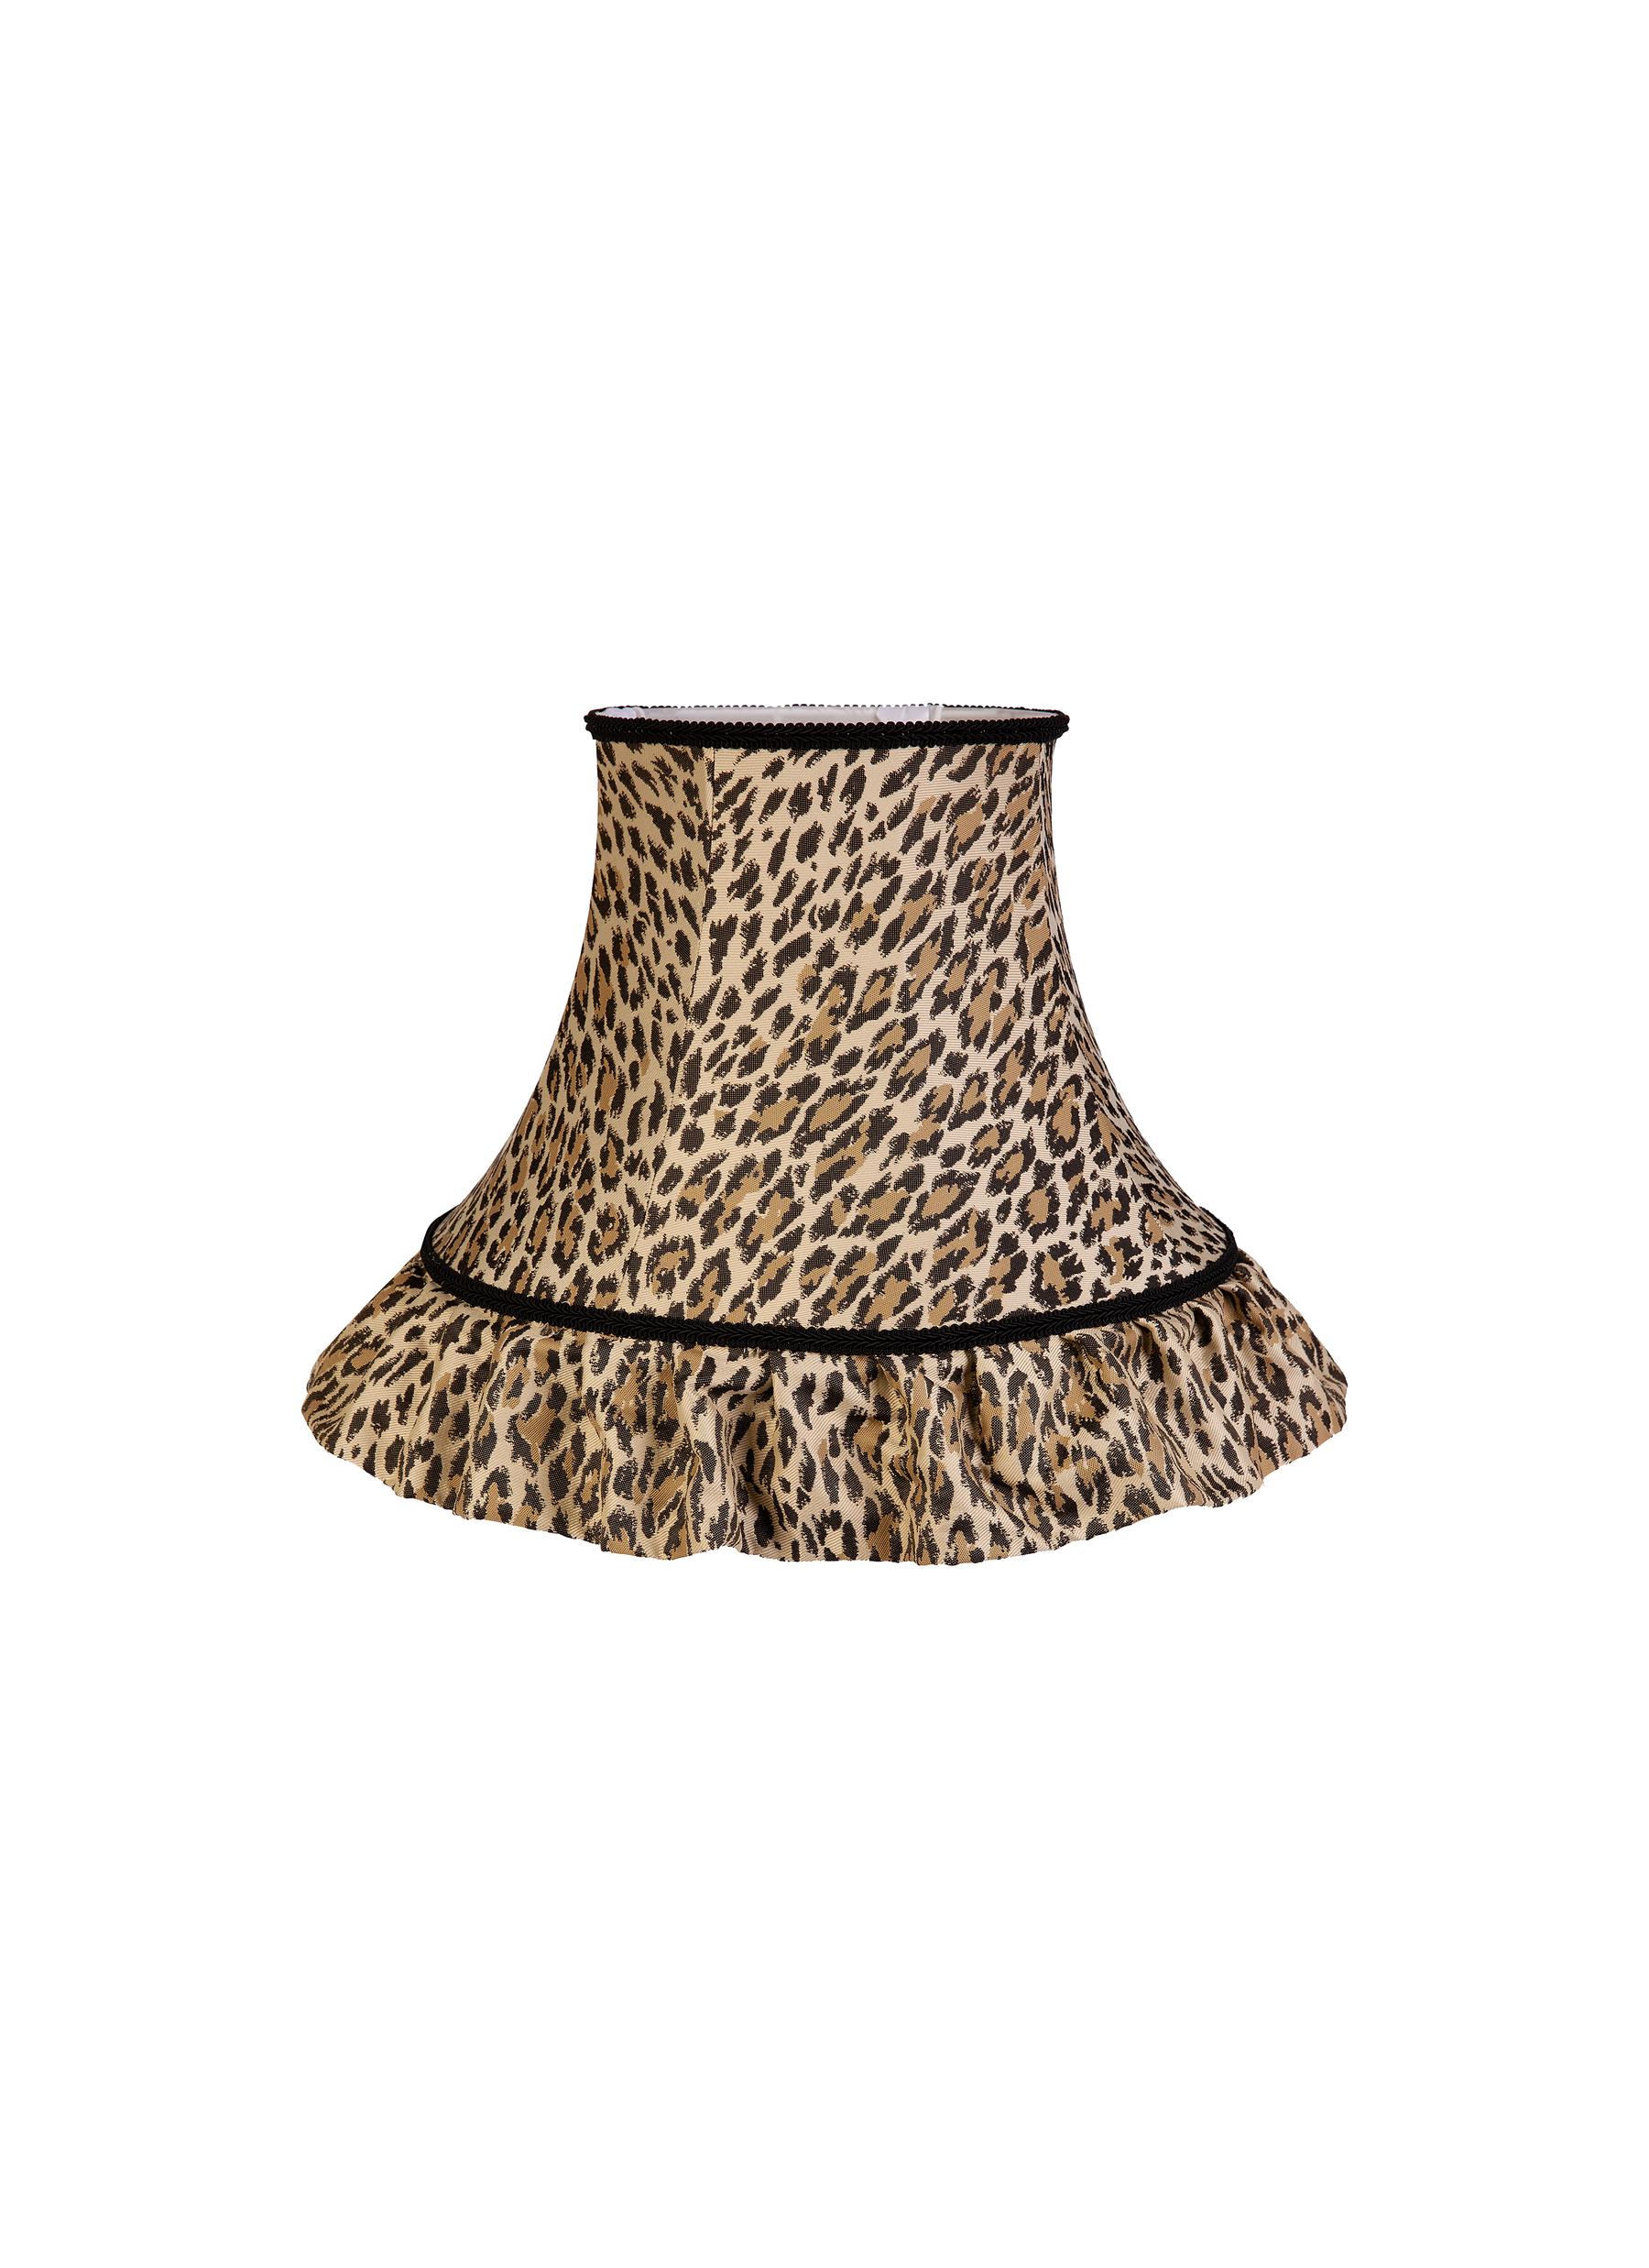 House Of Hackney Wild Card Jacquard Small Petticoat Lampshade - Butterscotch